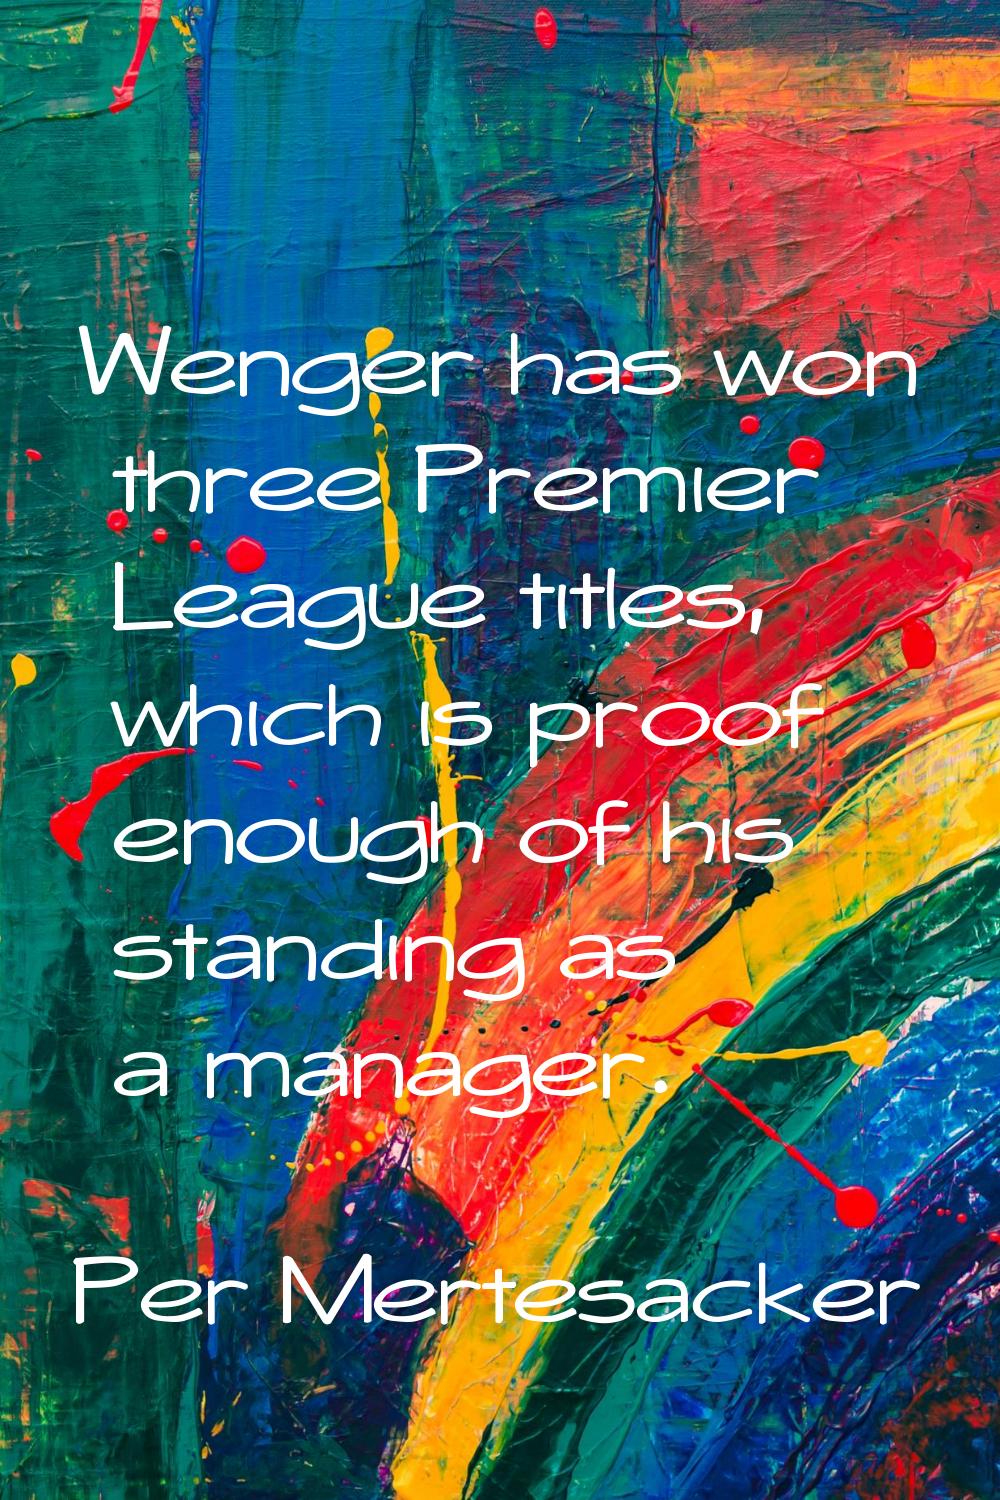 Wenger has won three Premier League titles, which is proof enough of his standing as a manager.